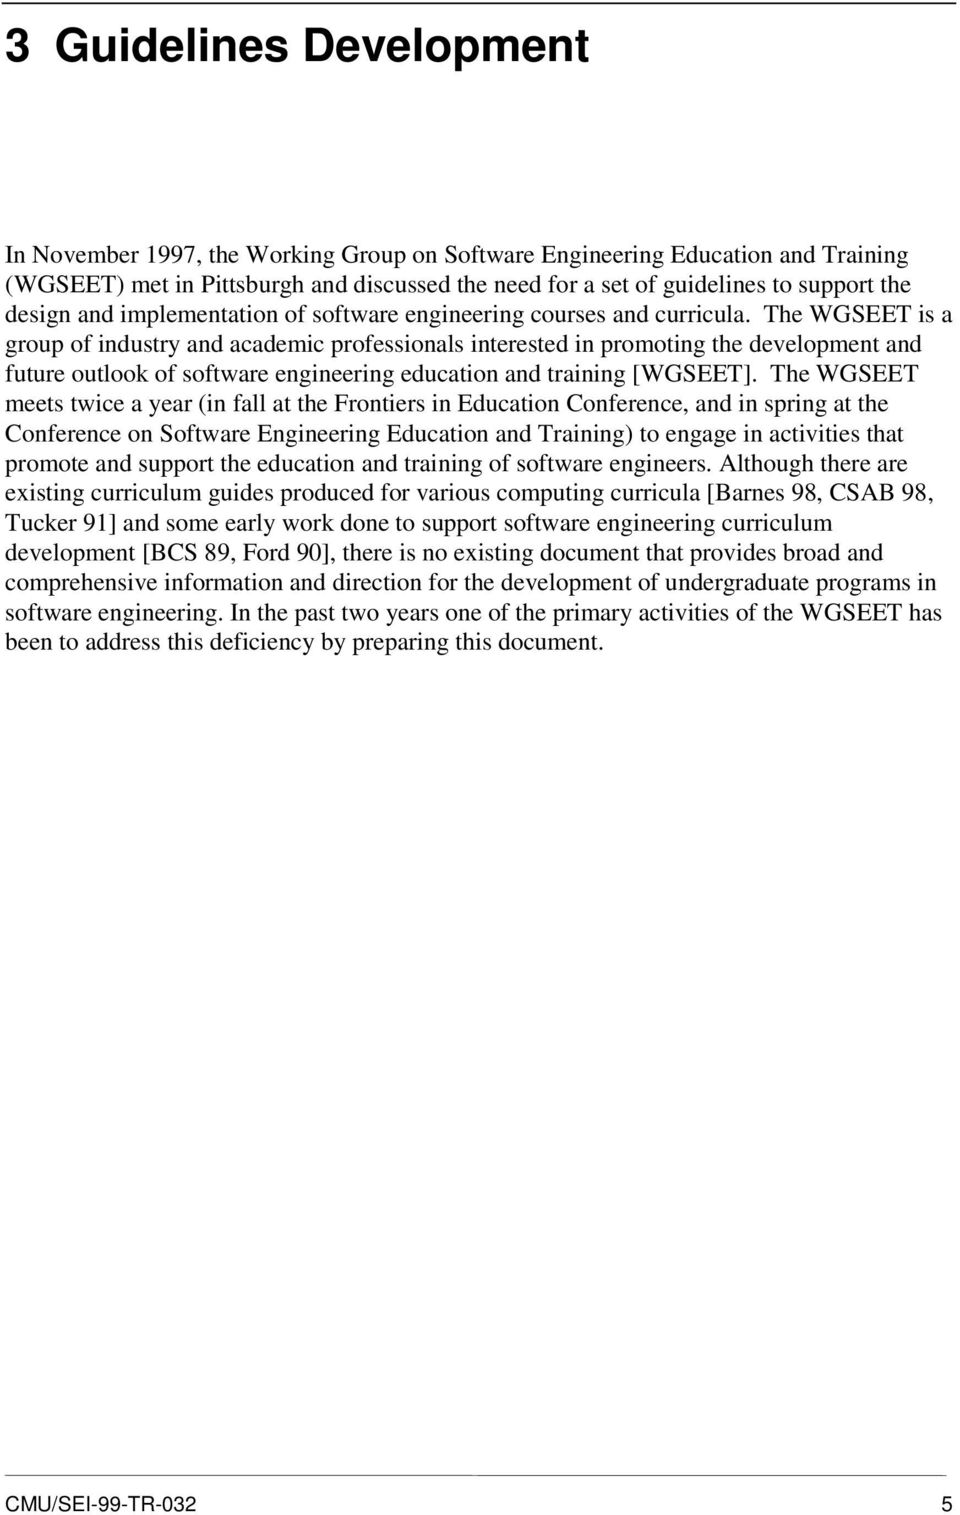 The WGSEET is a group of industry and academic professionals interested in promoting the development and future outlook of software engineering education and training [WGSEET].